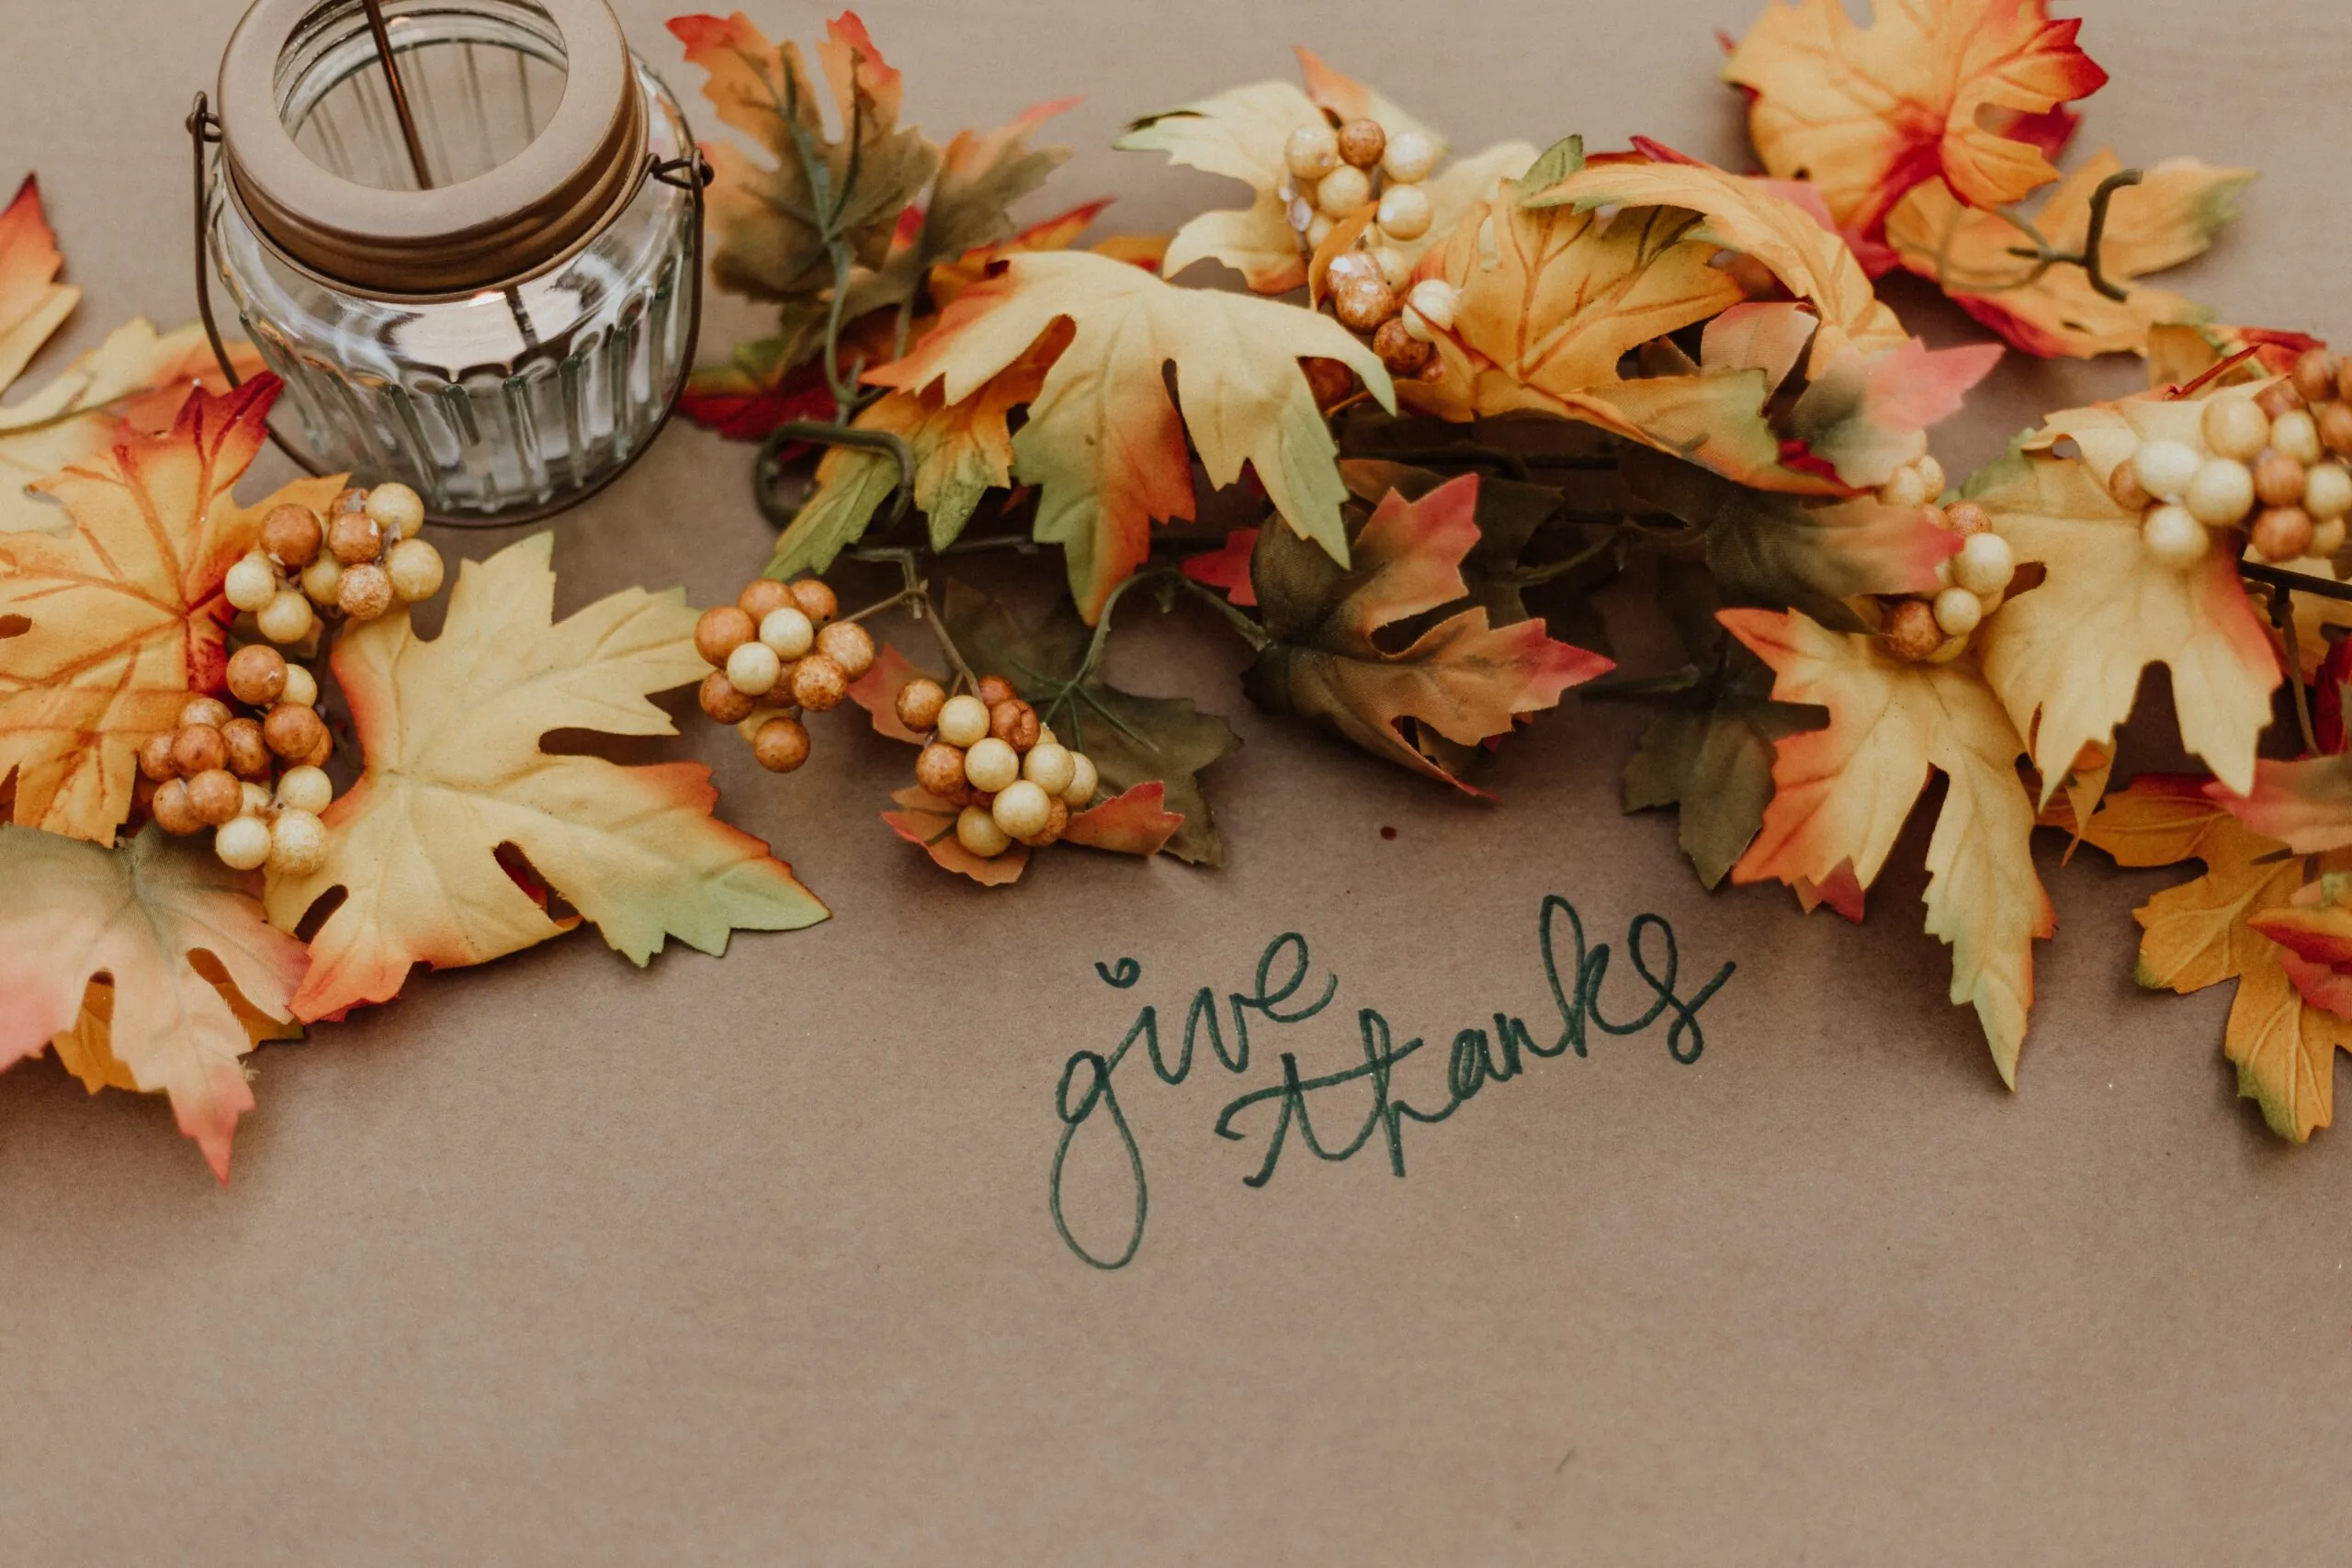 Fall leaves on a table with "give thanks"